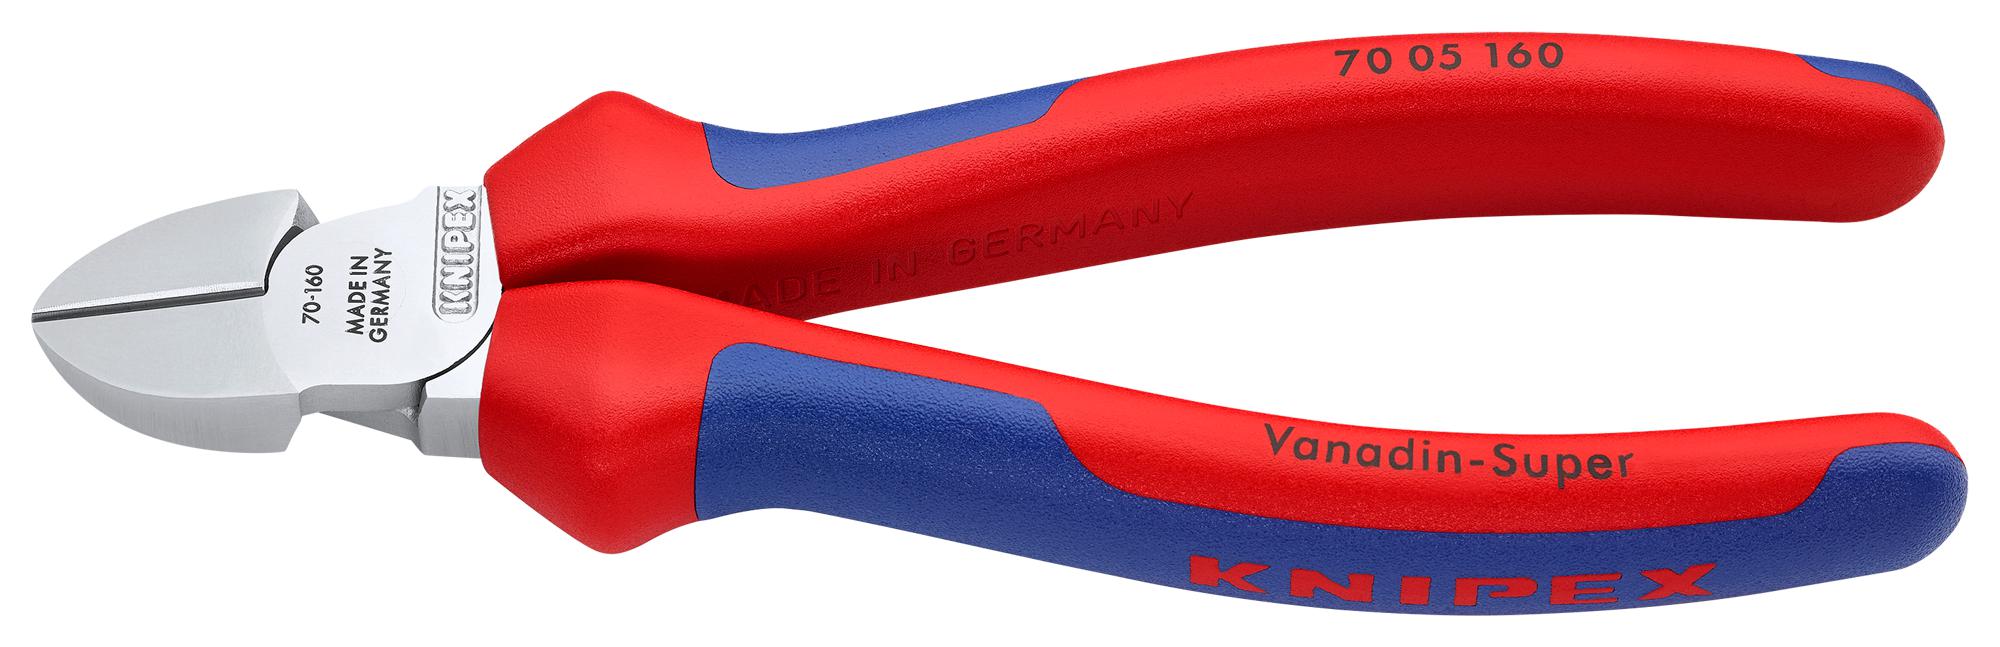 70 05 160 CUTTER, SIDE, 160MM KNIPEX